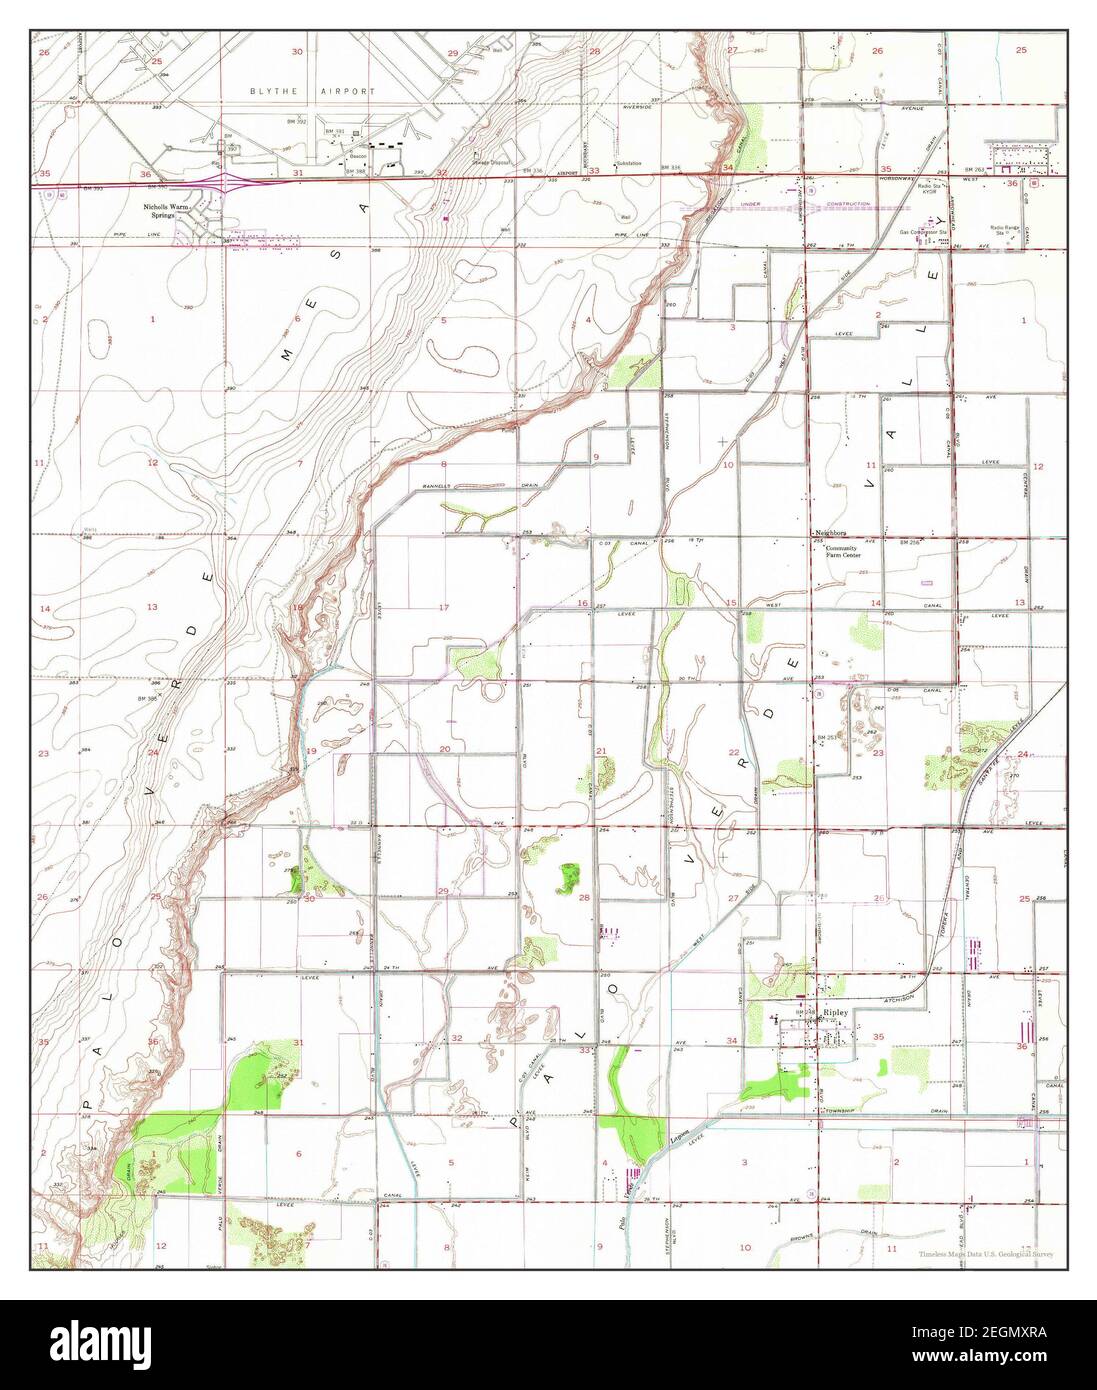 Ripley, California, map 1952, 1:24000, United States of America by Timeless Maps, data U.S. Geological Survey Stock Photo